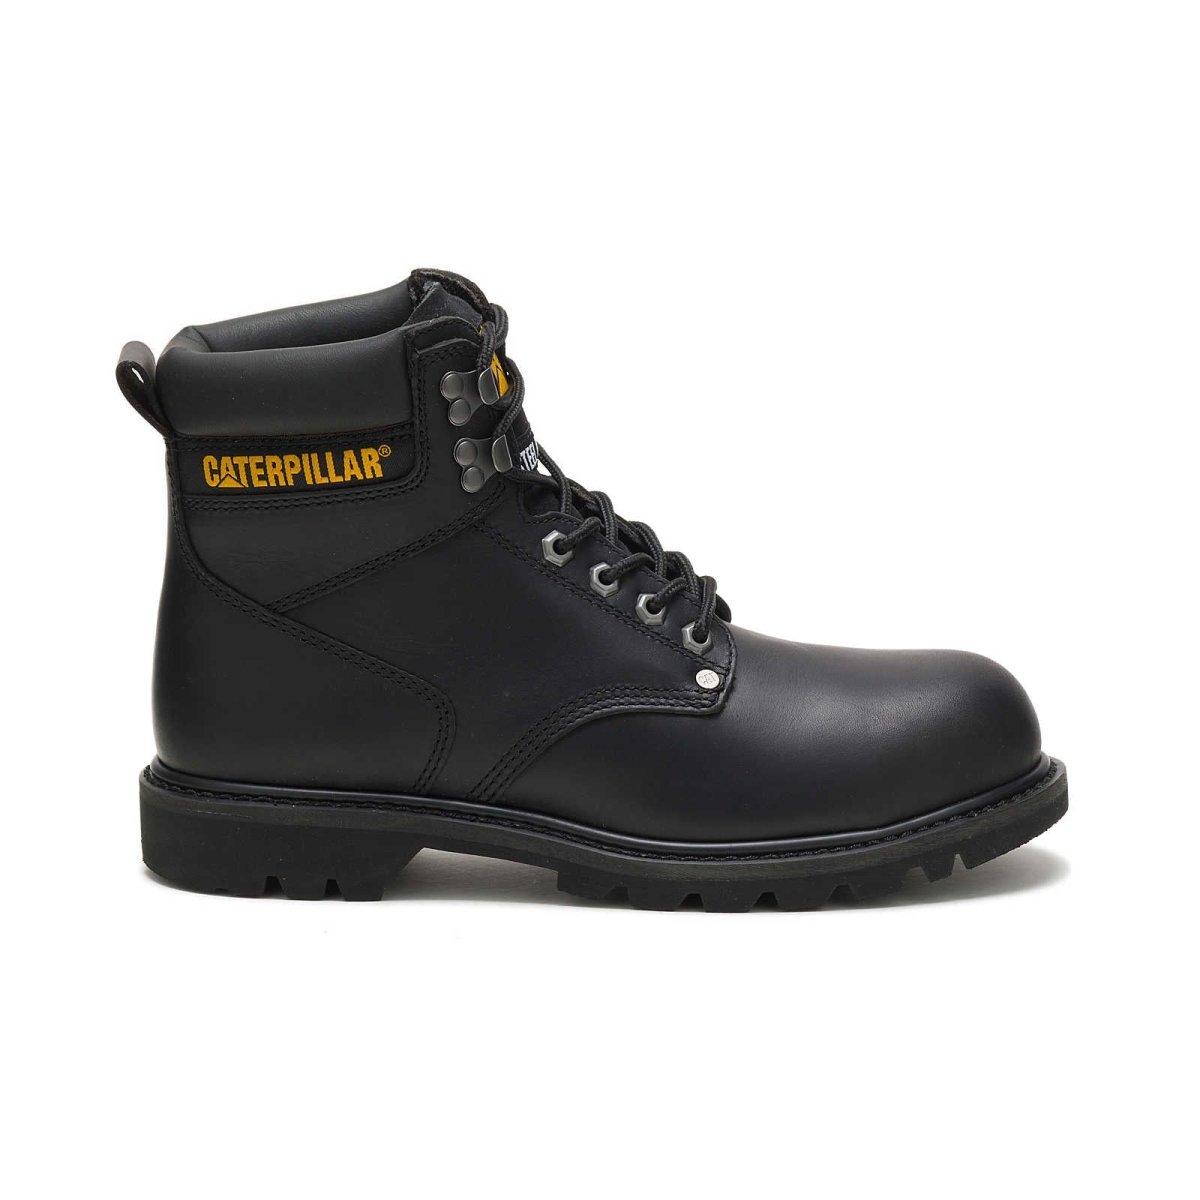 CATERPILLAR SECOND SHIFT STEEL TOE MEN'S WORK BOOT (P89135) IN BLACK - TLW Shoes